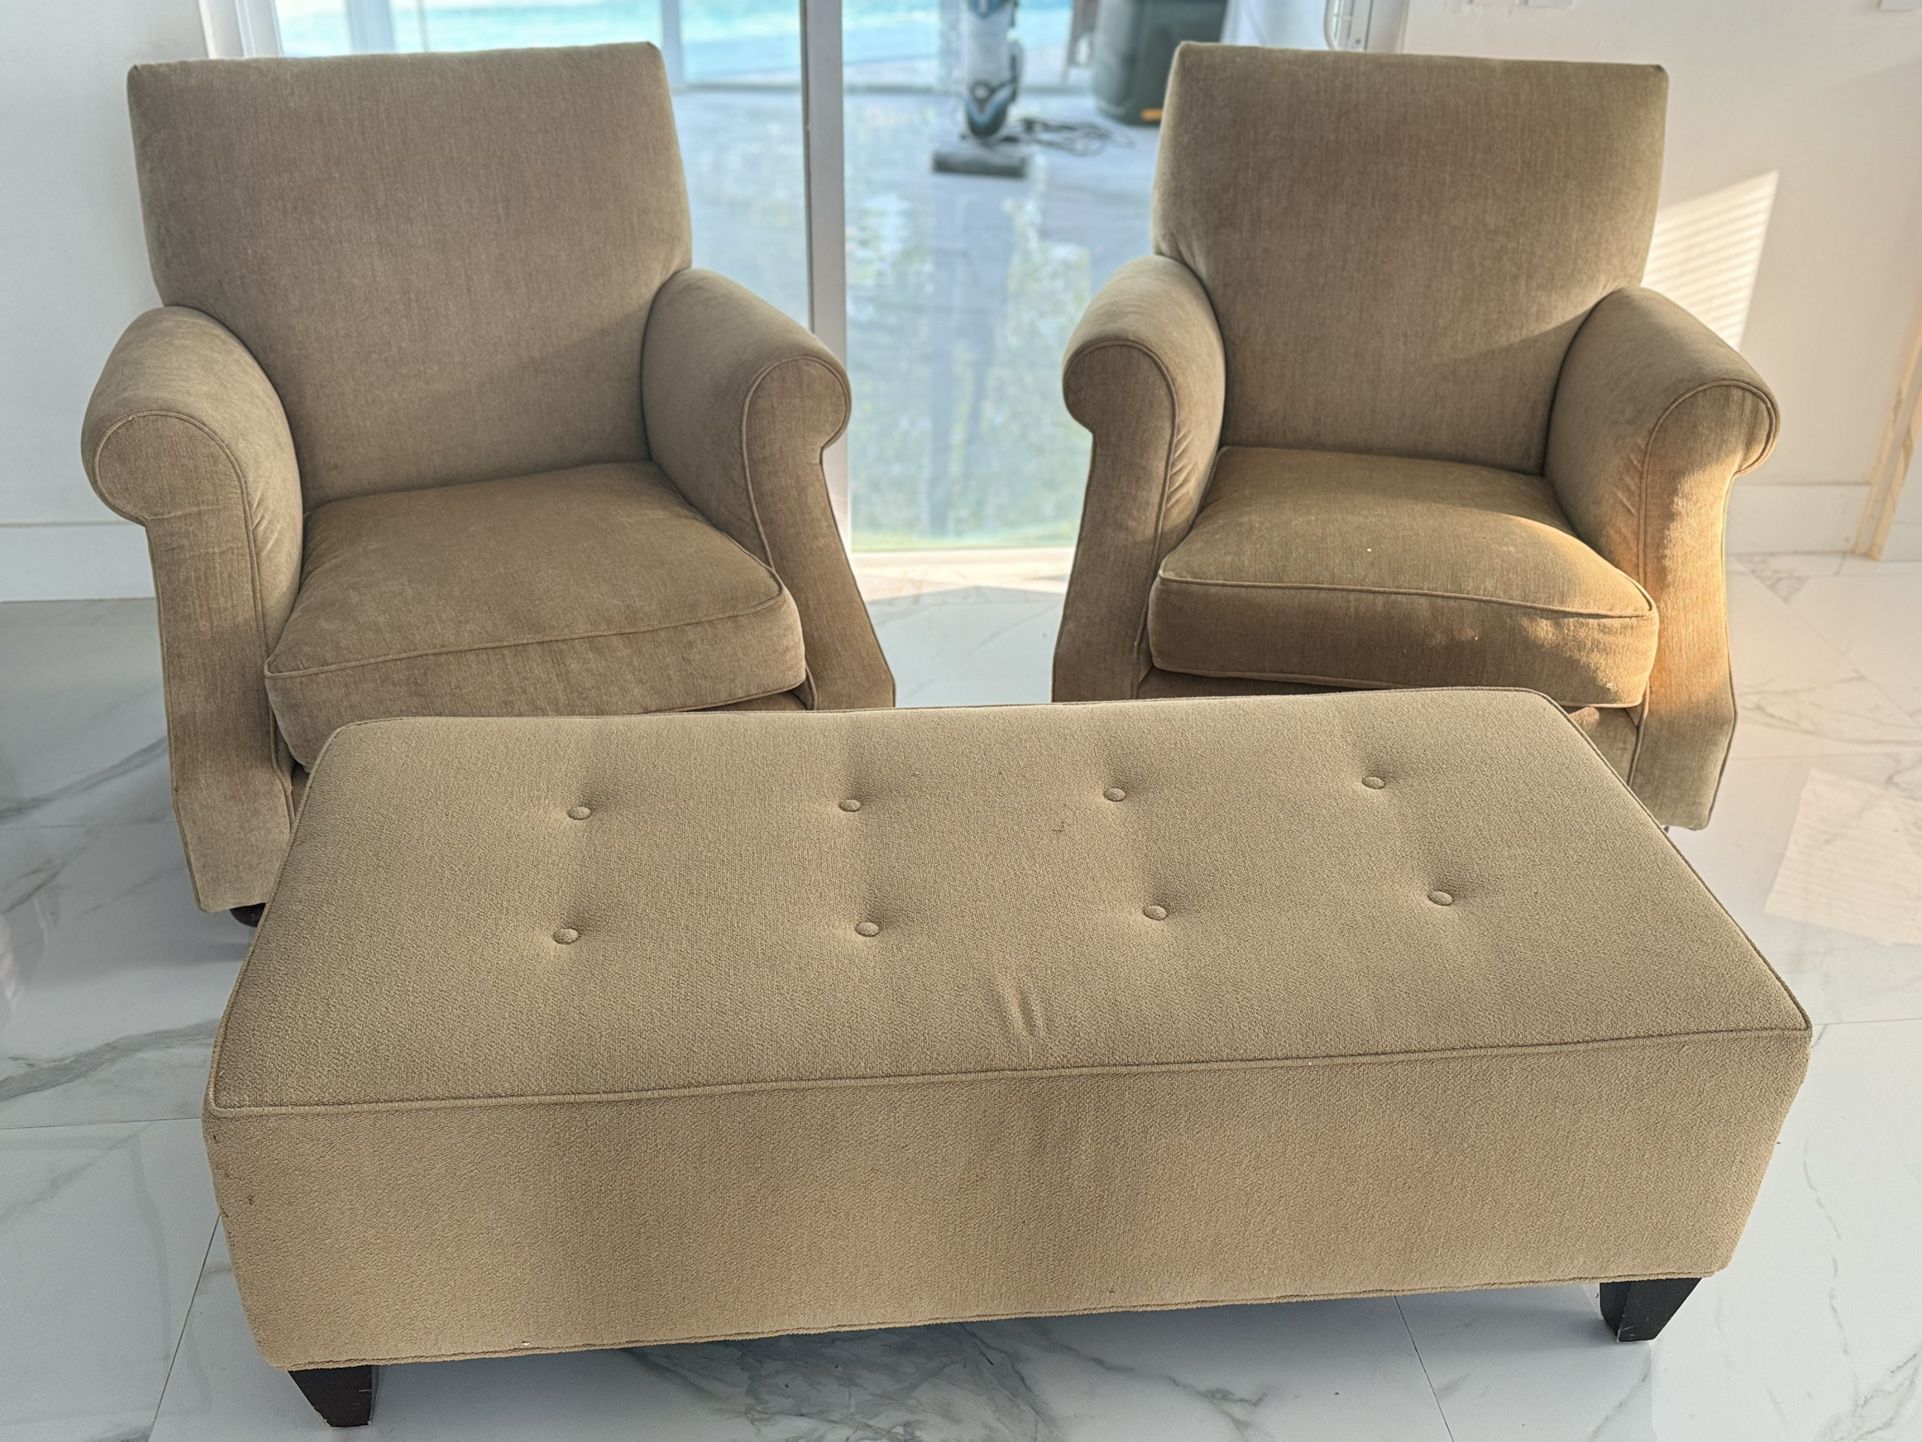 Couch Set For Sale 